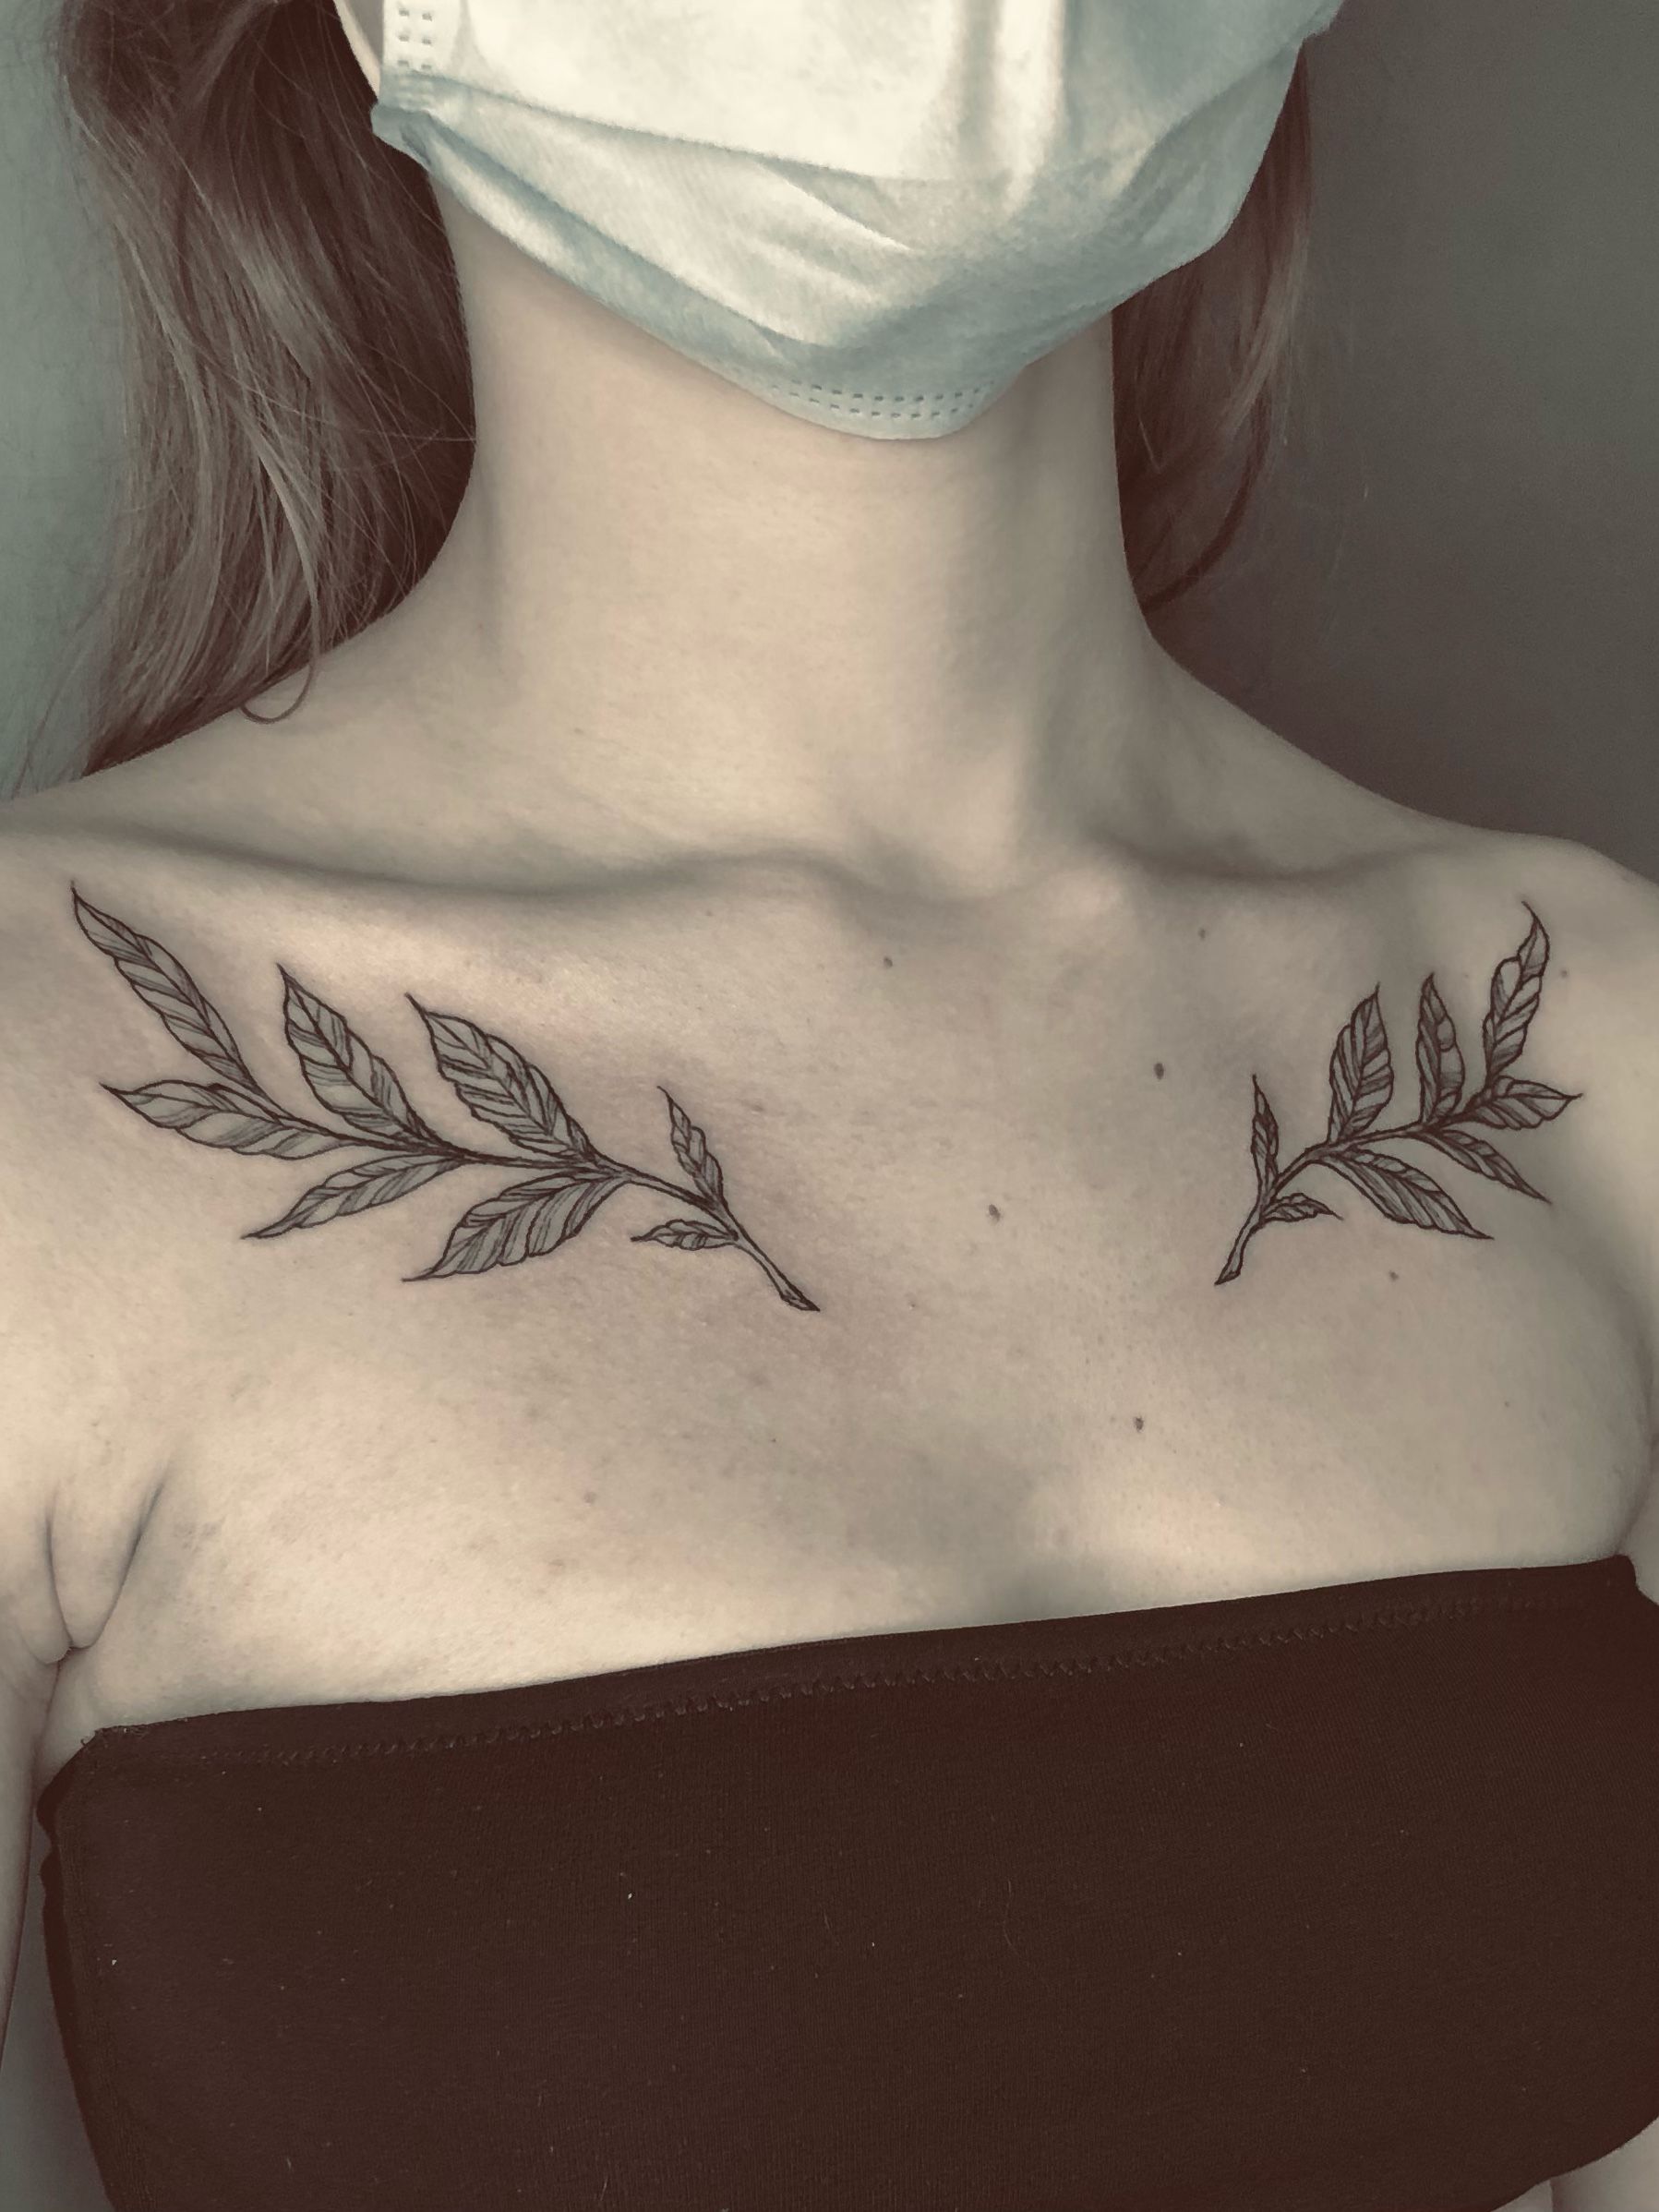 Tiny leaf tattoo on the chest